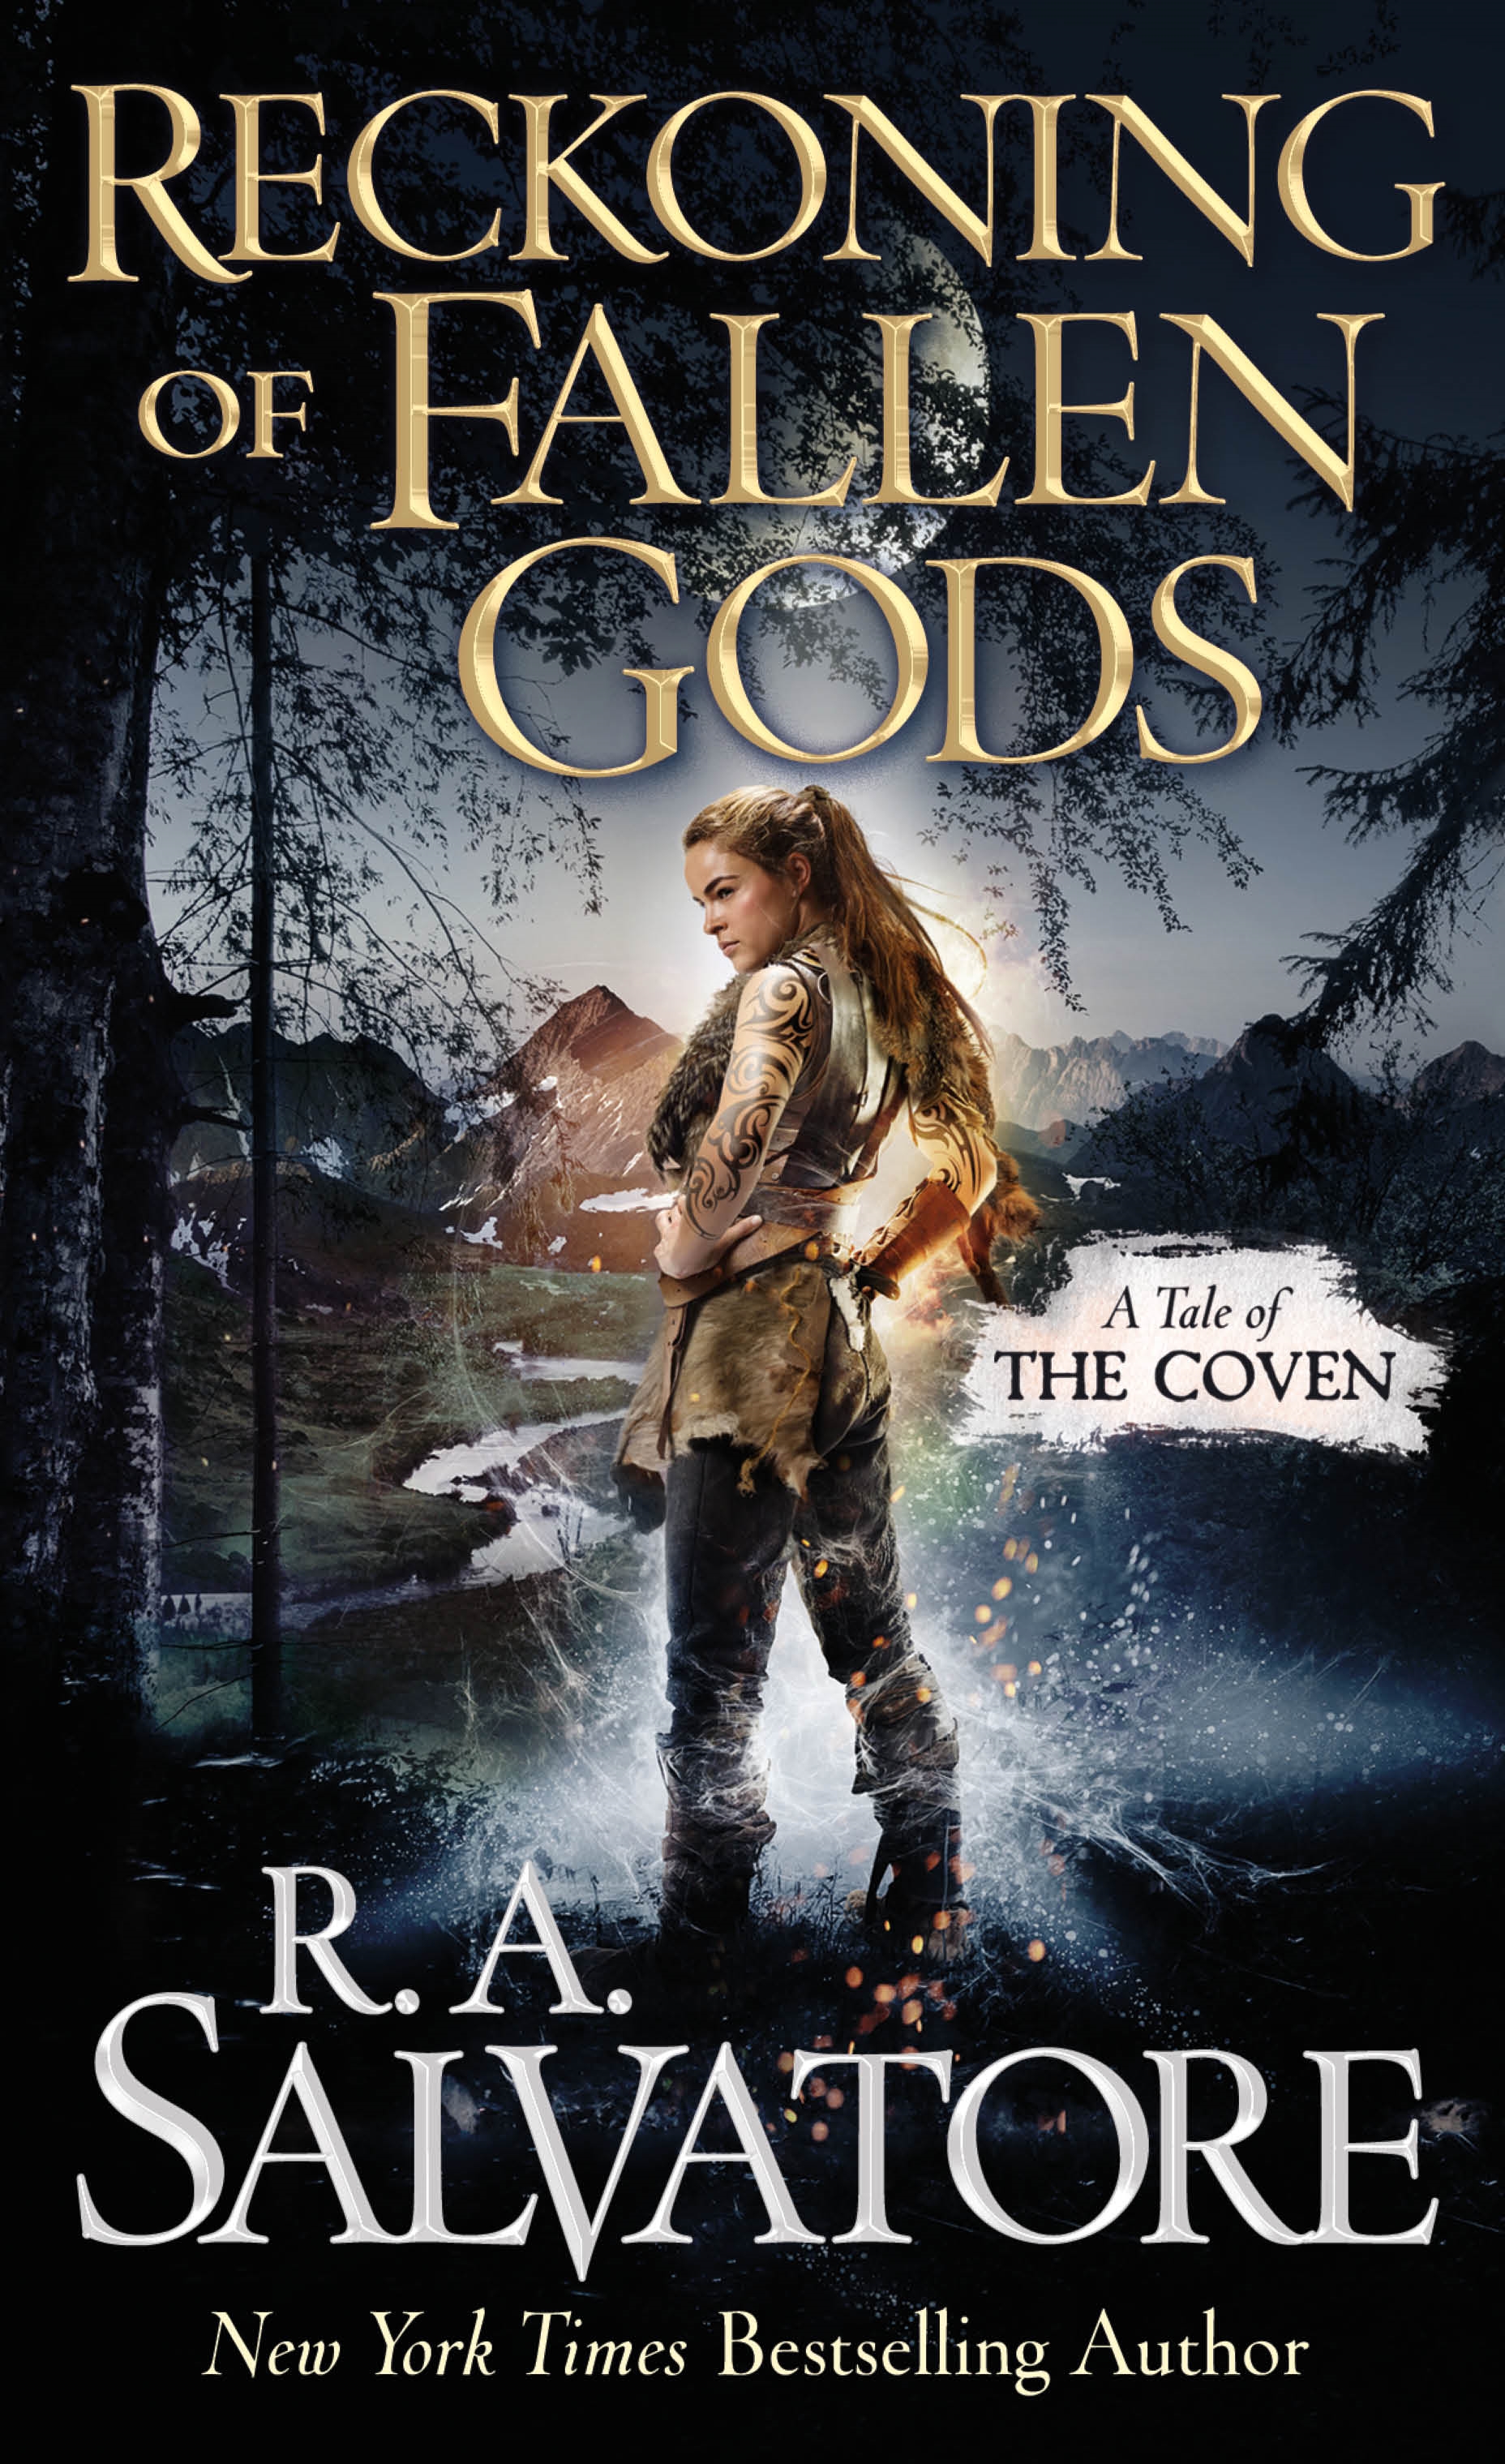 Reckoning of Fallen Gods : A Tale of the Coven by R. A. Salvatore